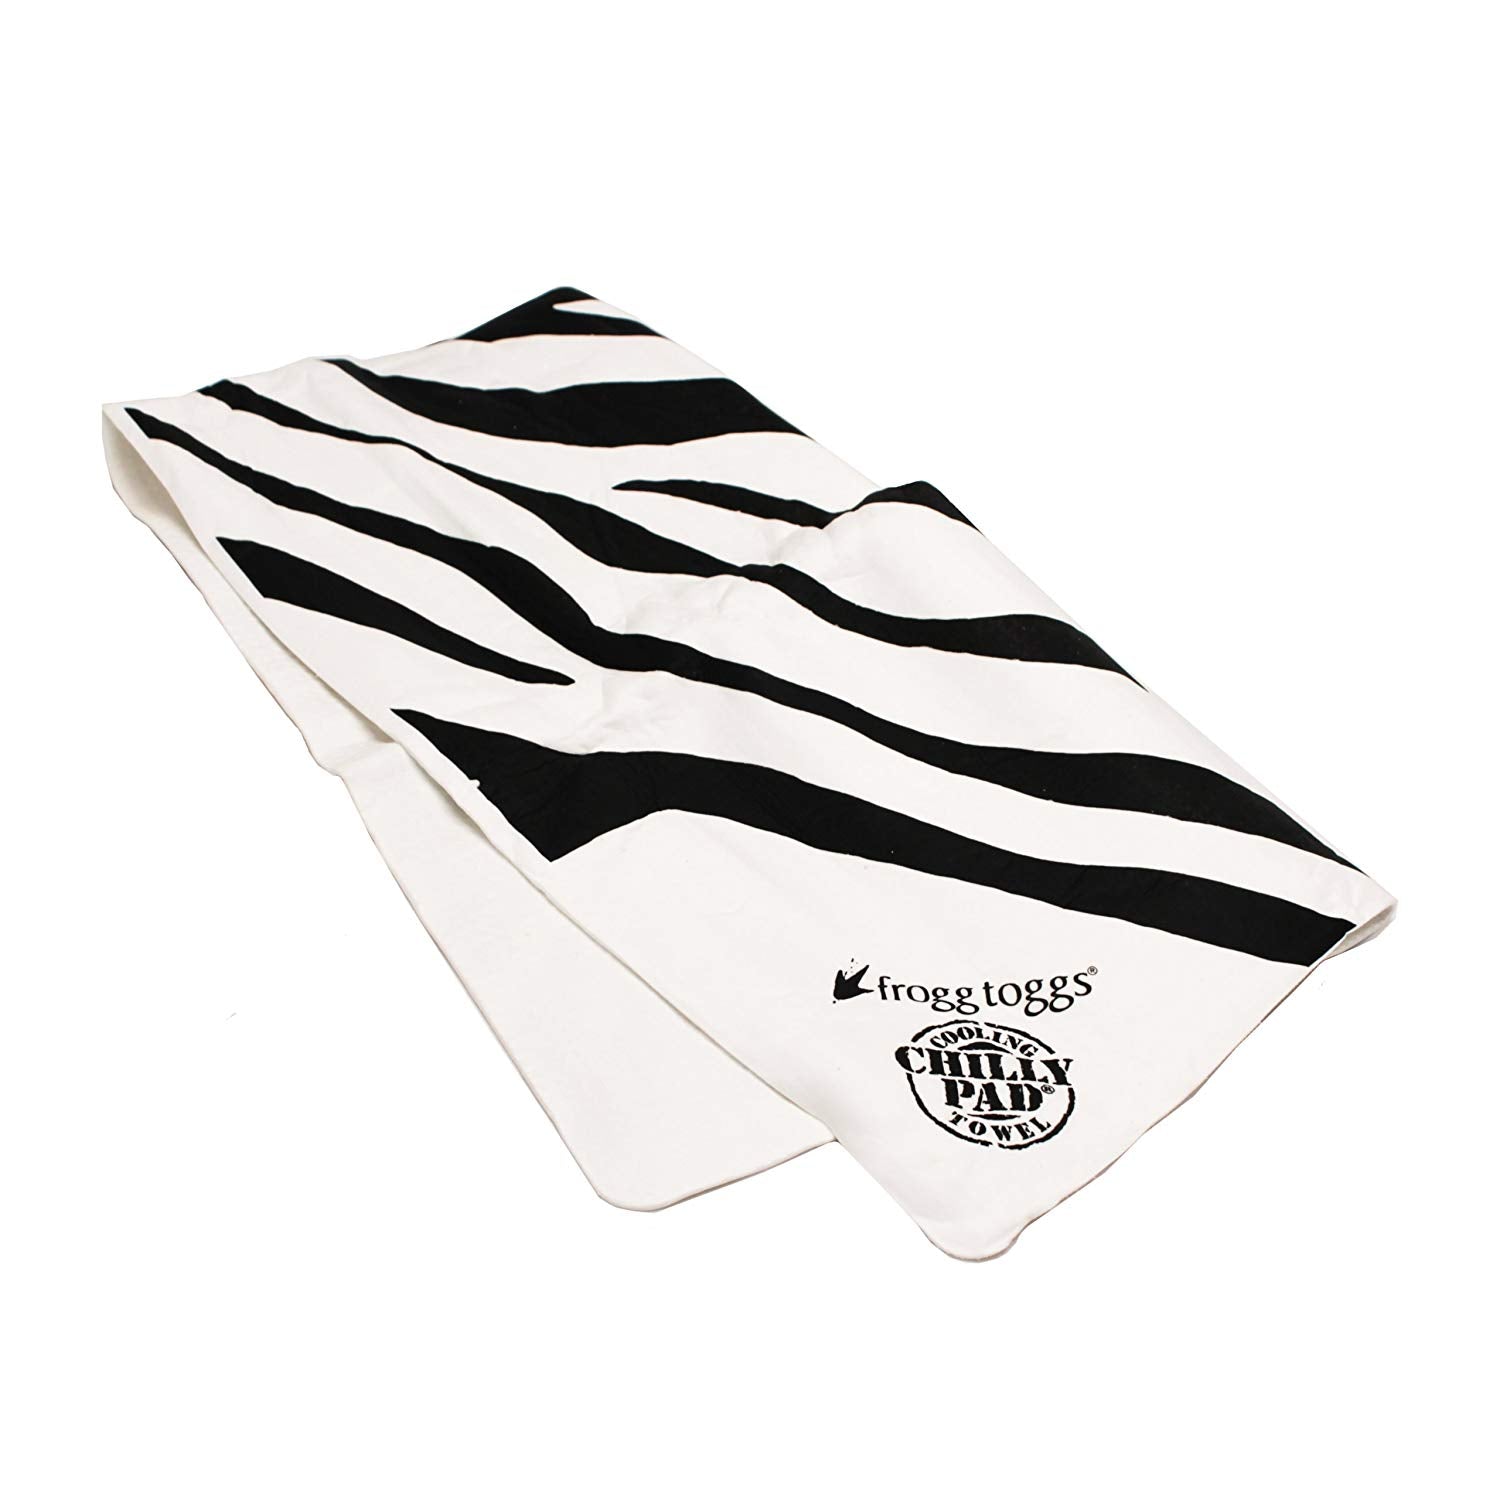 Frogg Toggs Frogg-Edelic Chilly Pad Towel Zebra Black and White 32.5" x 12.5"